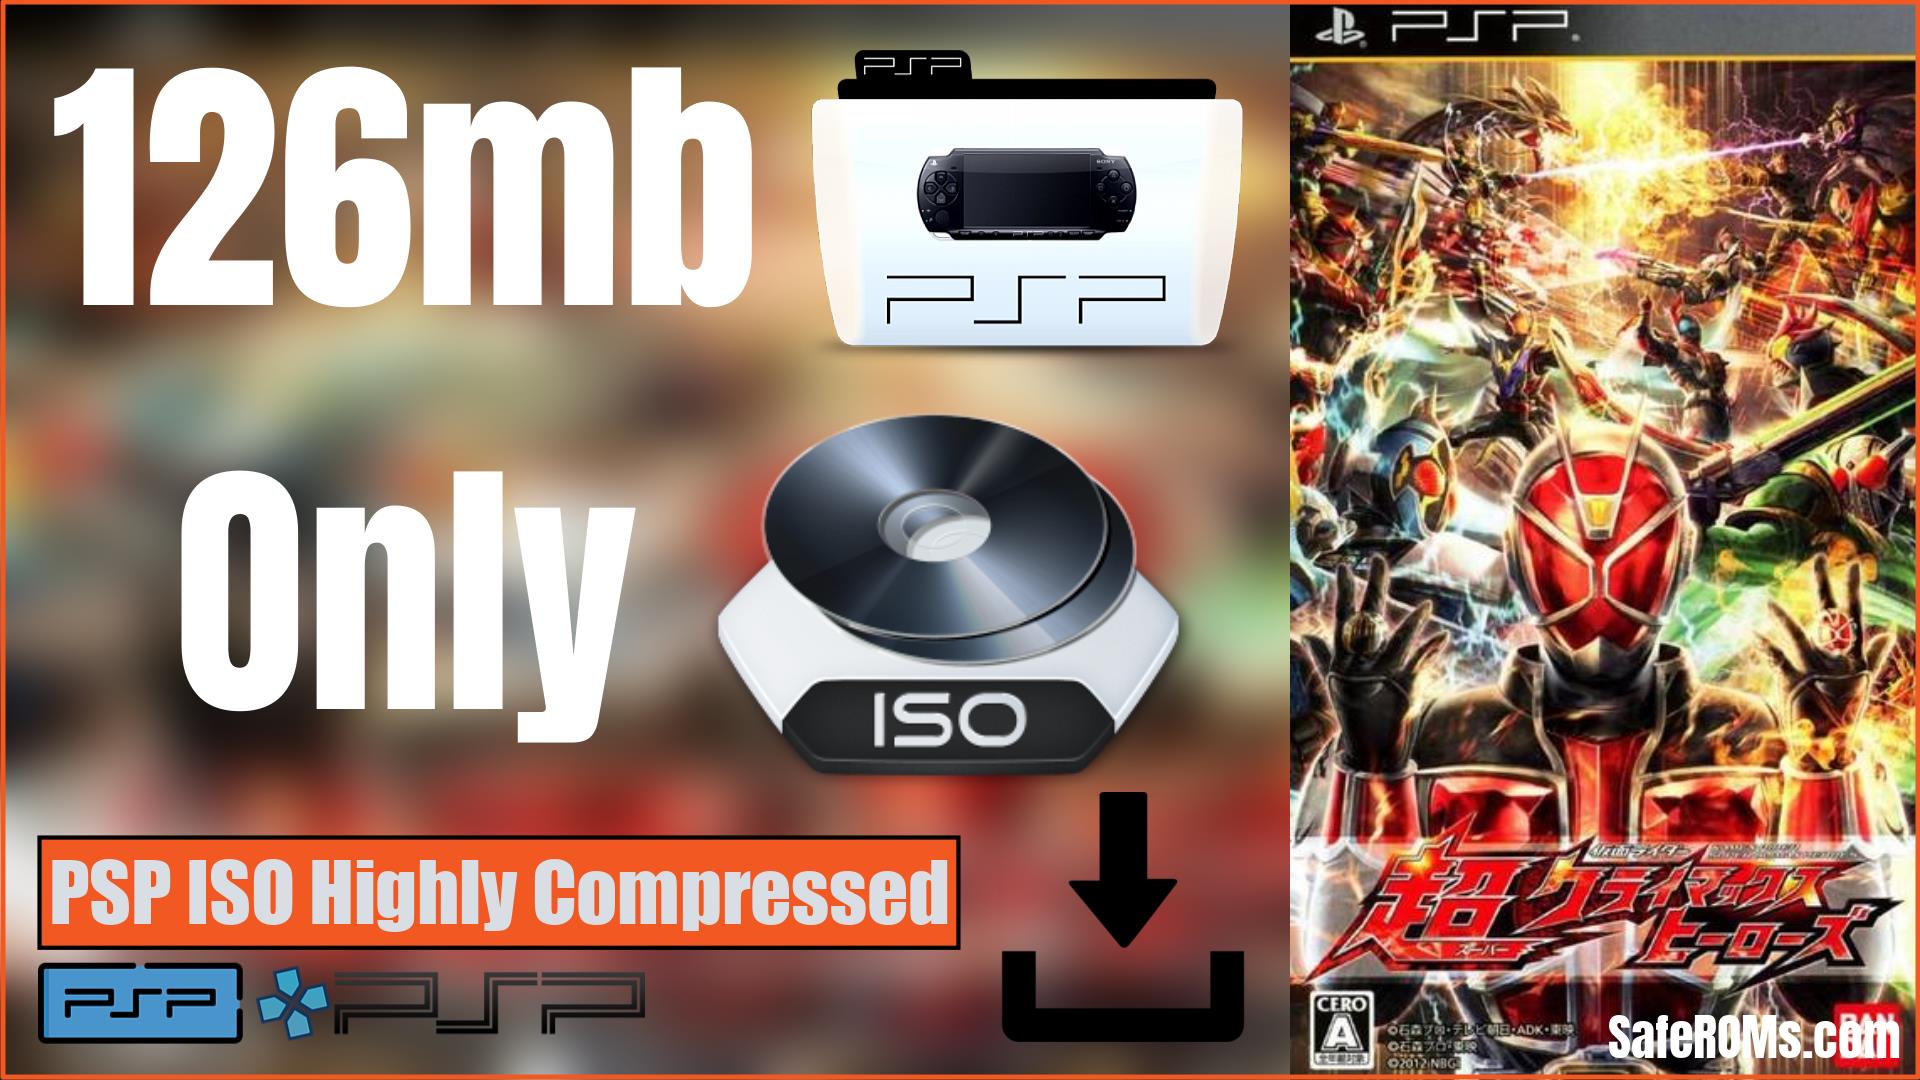 Kamen Rider Super Climax Heroes PSP ISO Highly Compressed Download